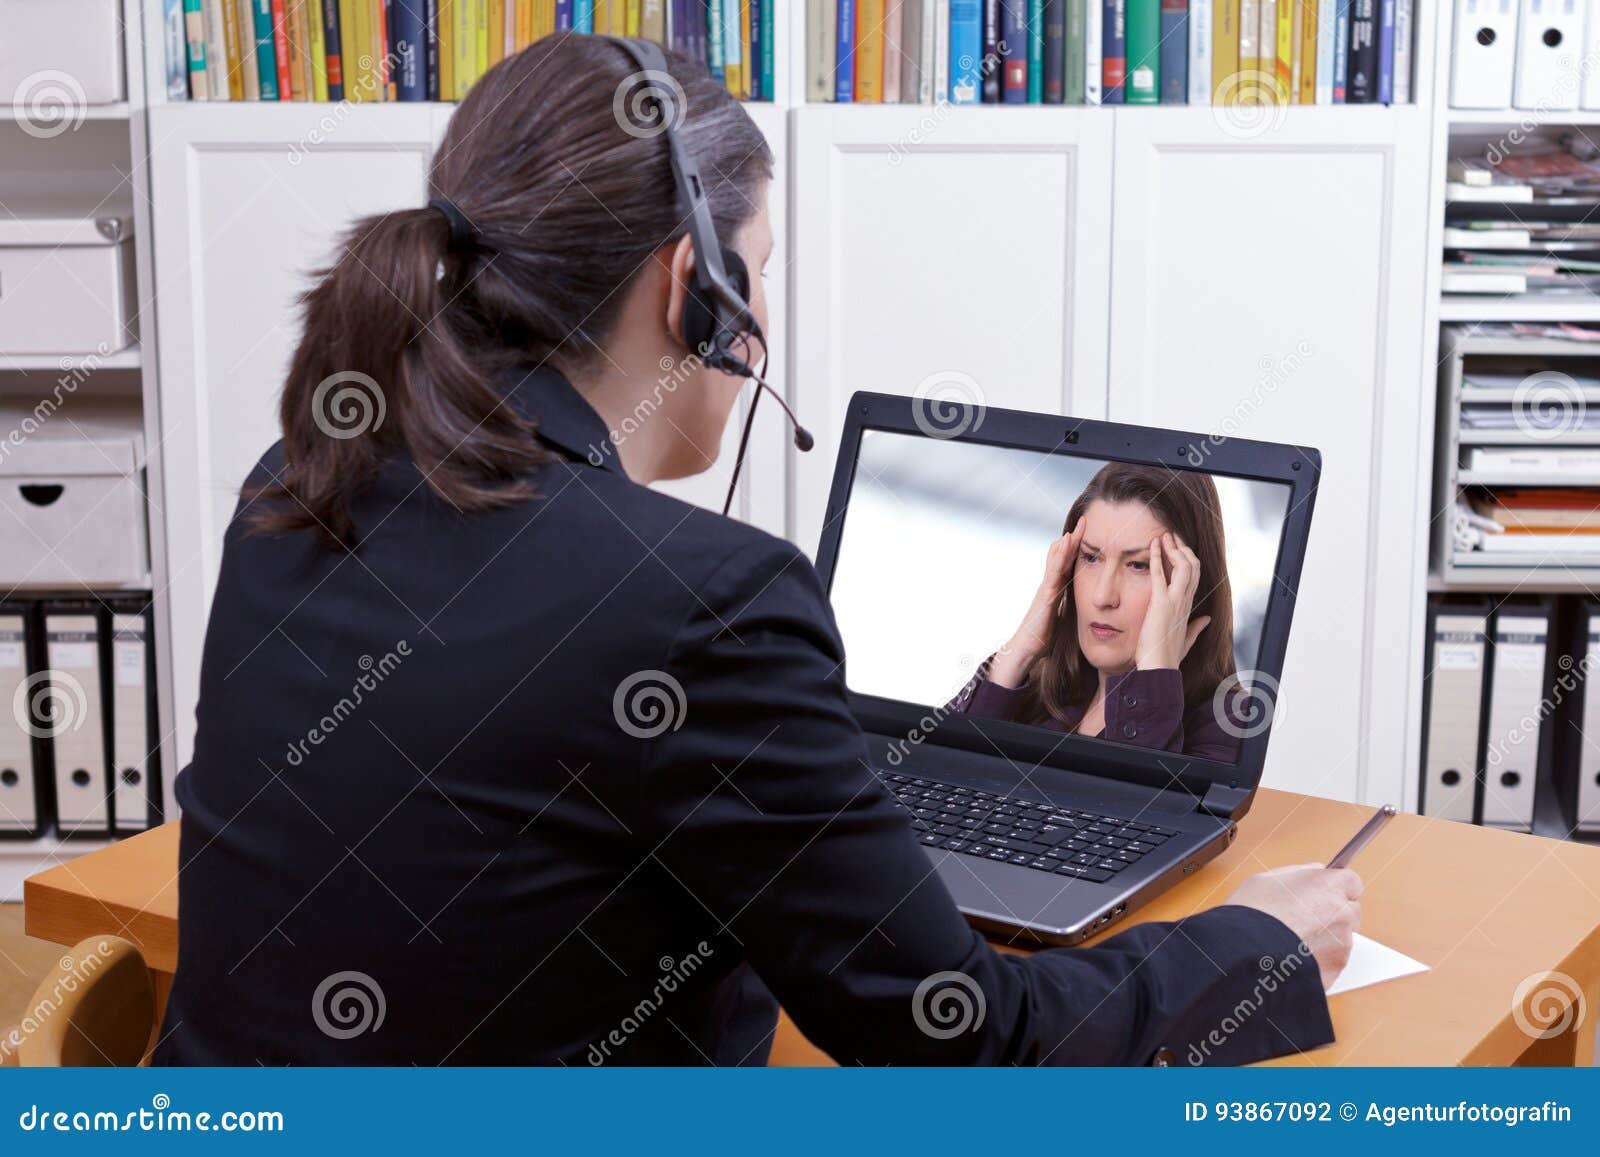 counselor headset online call patient